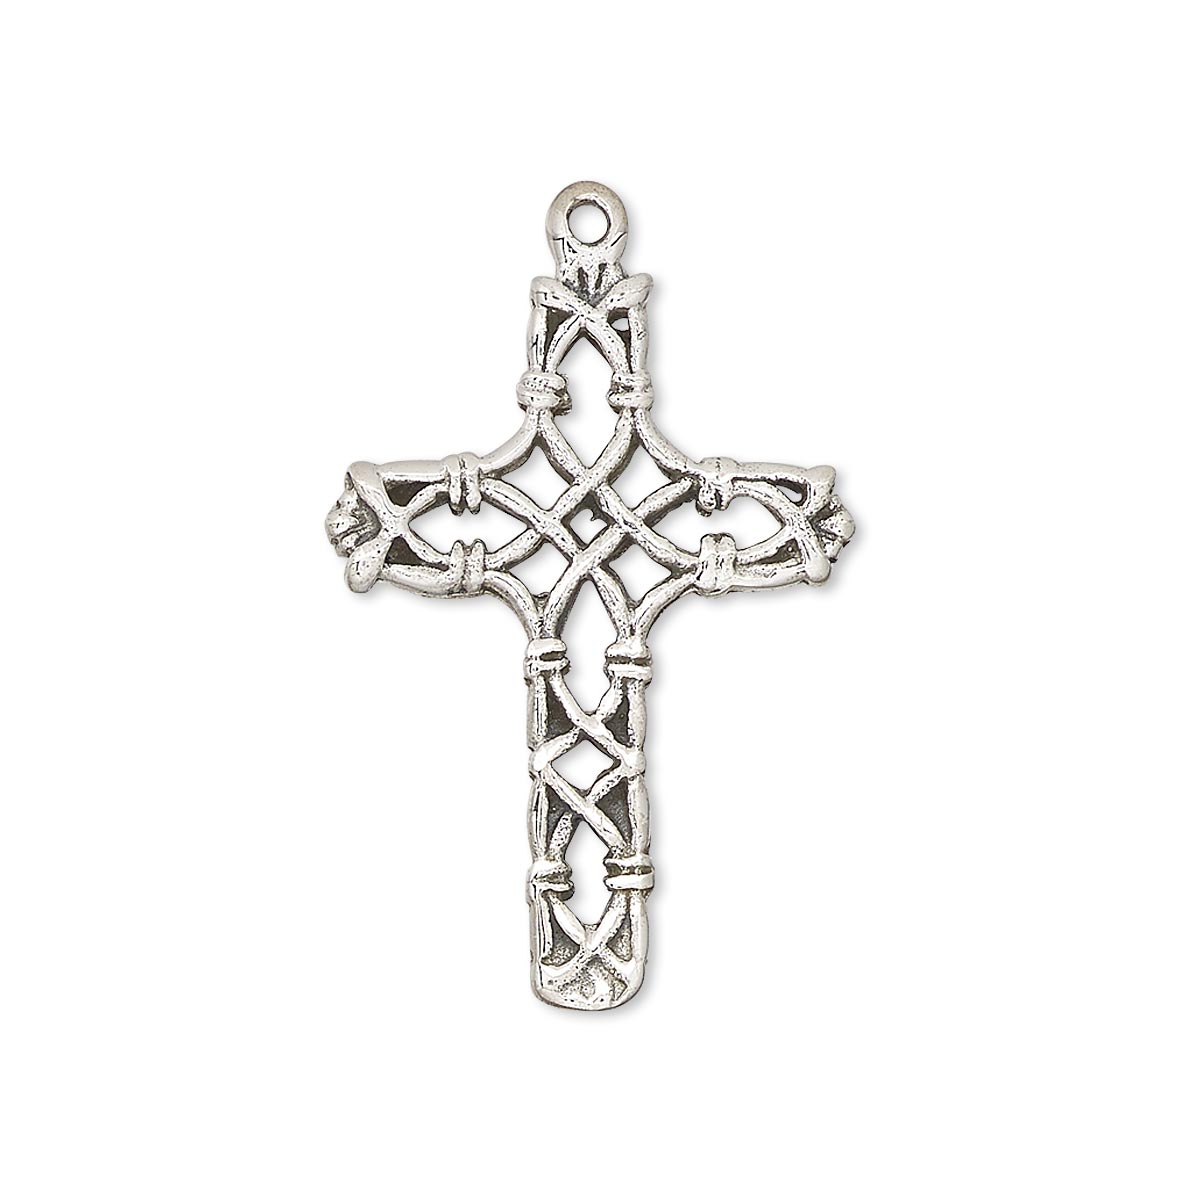 Drop, antiqued sterling silver, 27x19mm cross with vine design. Sold ...